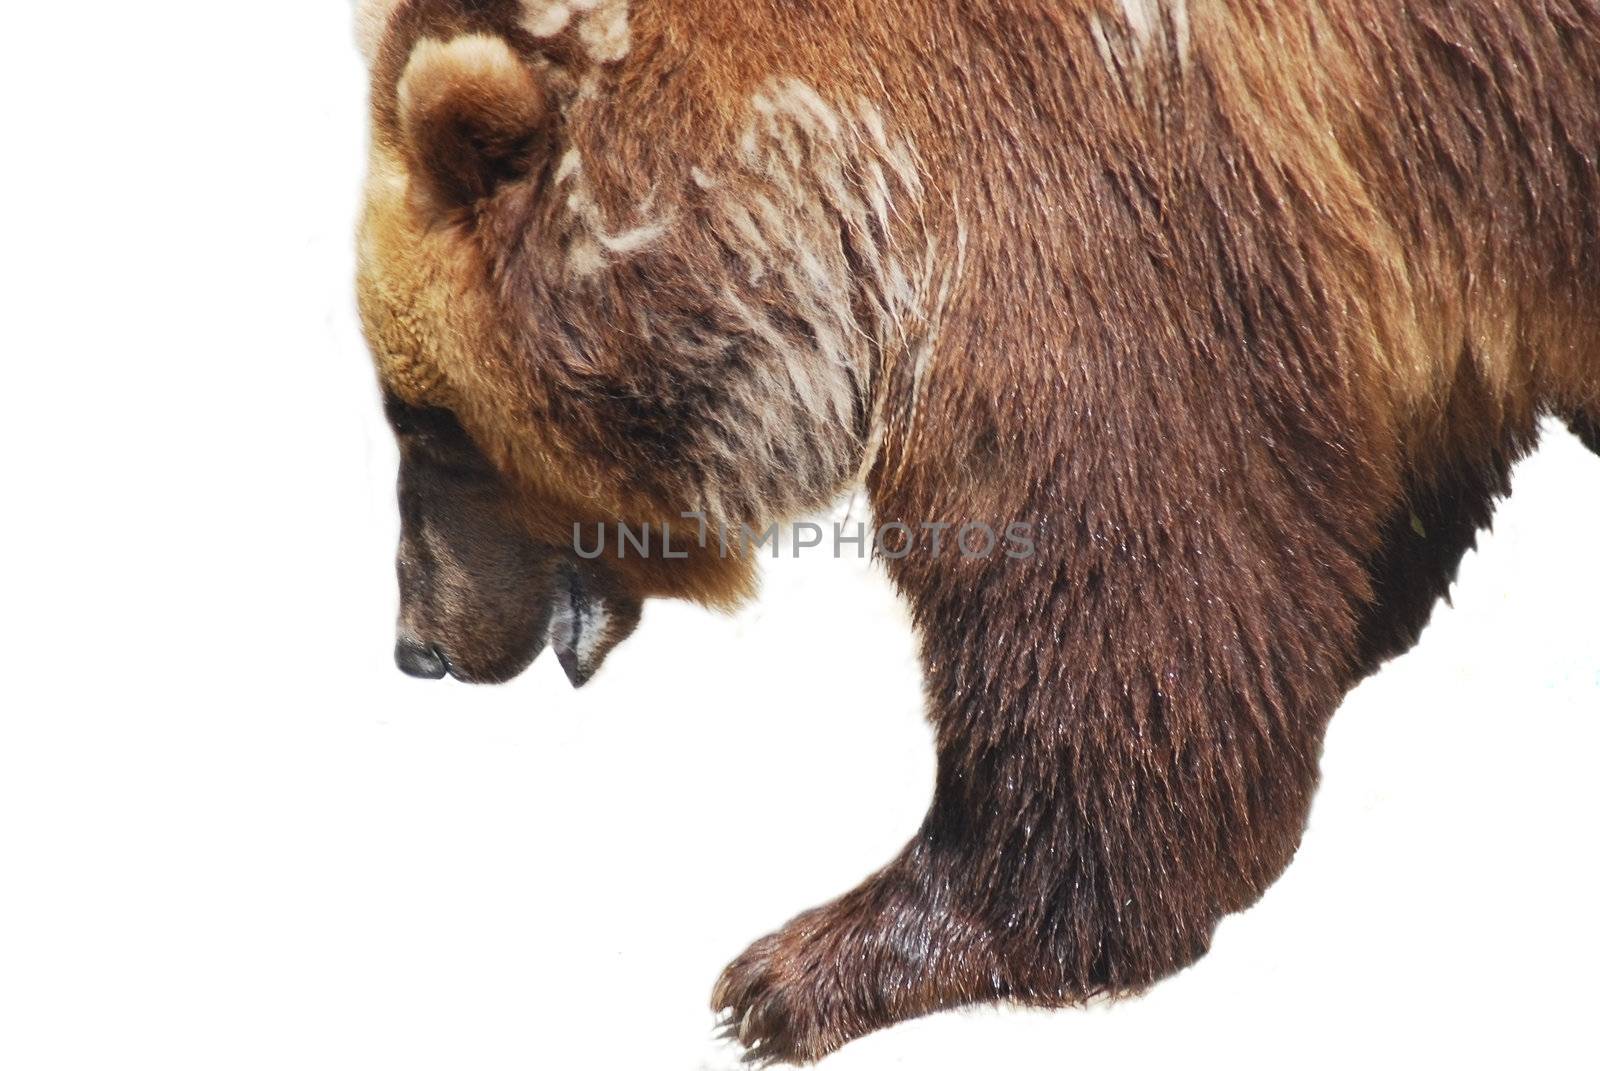 The brown bear close up isolated on white, wild life